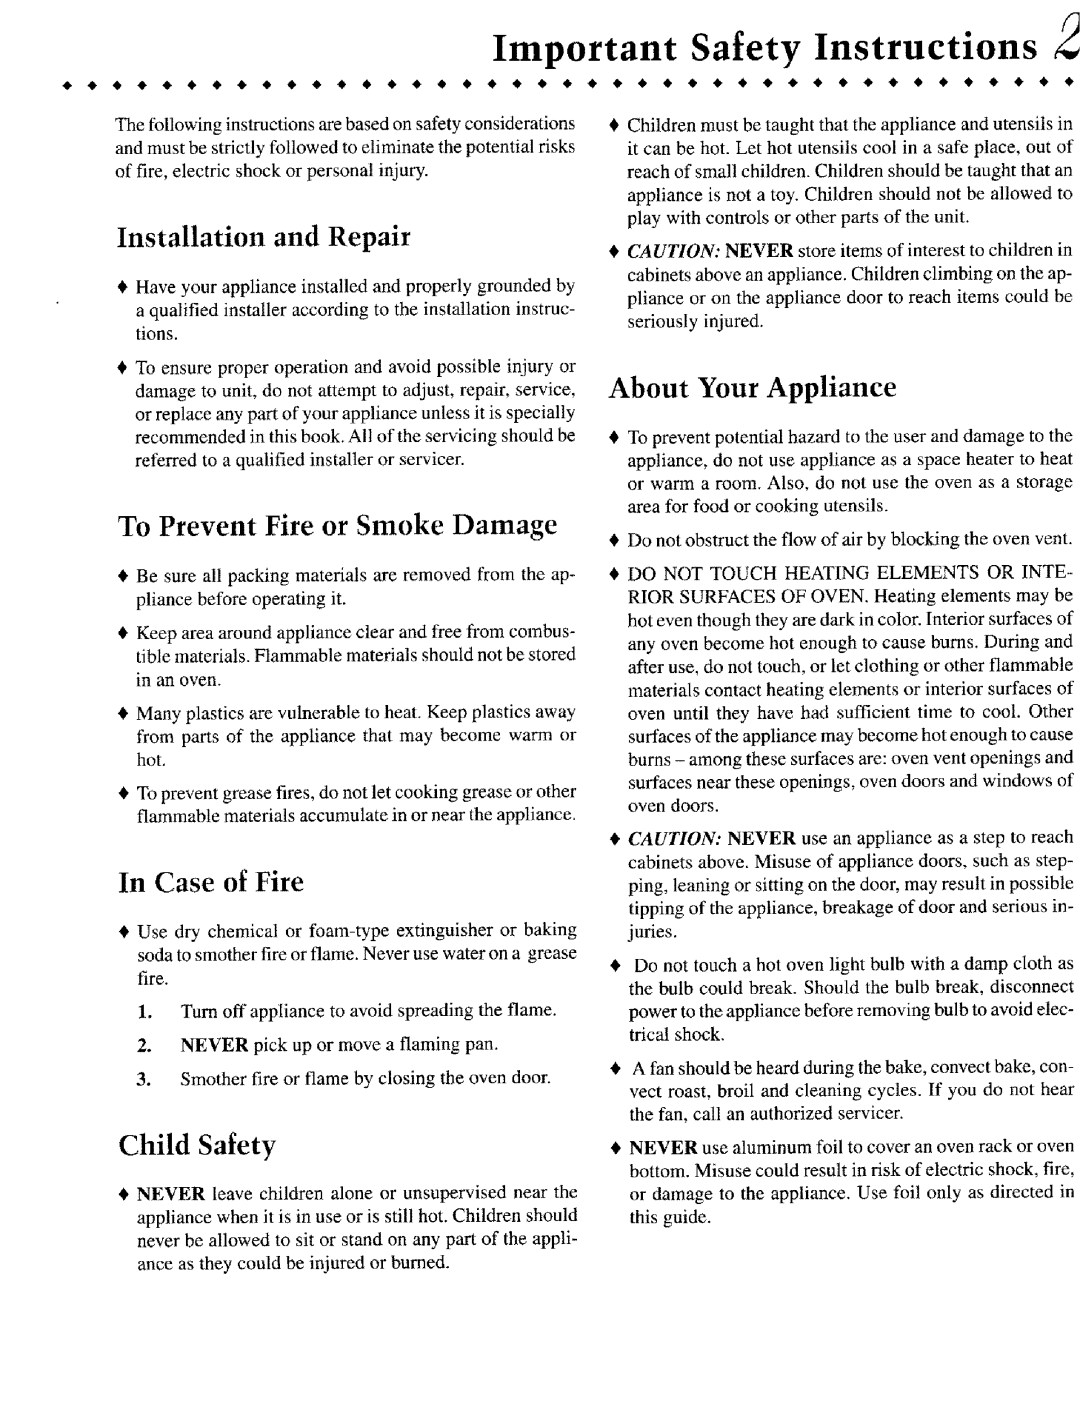 Jenn-Air JIVR /8530 Important Safety Instructions, To Prevent Fire or Smoke Damage, Child Safety, Installation and Repair 